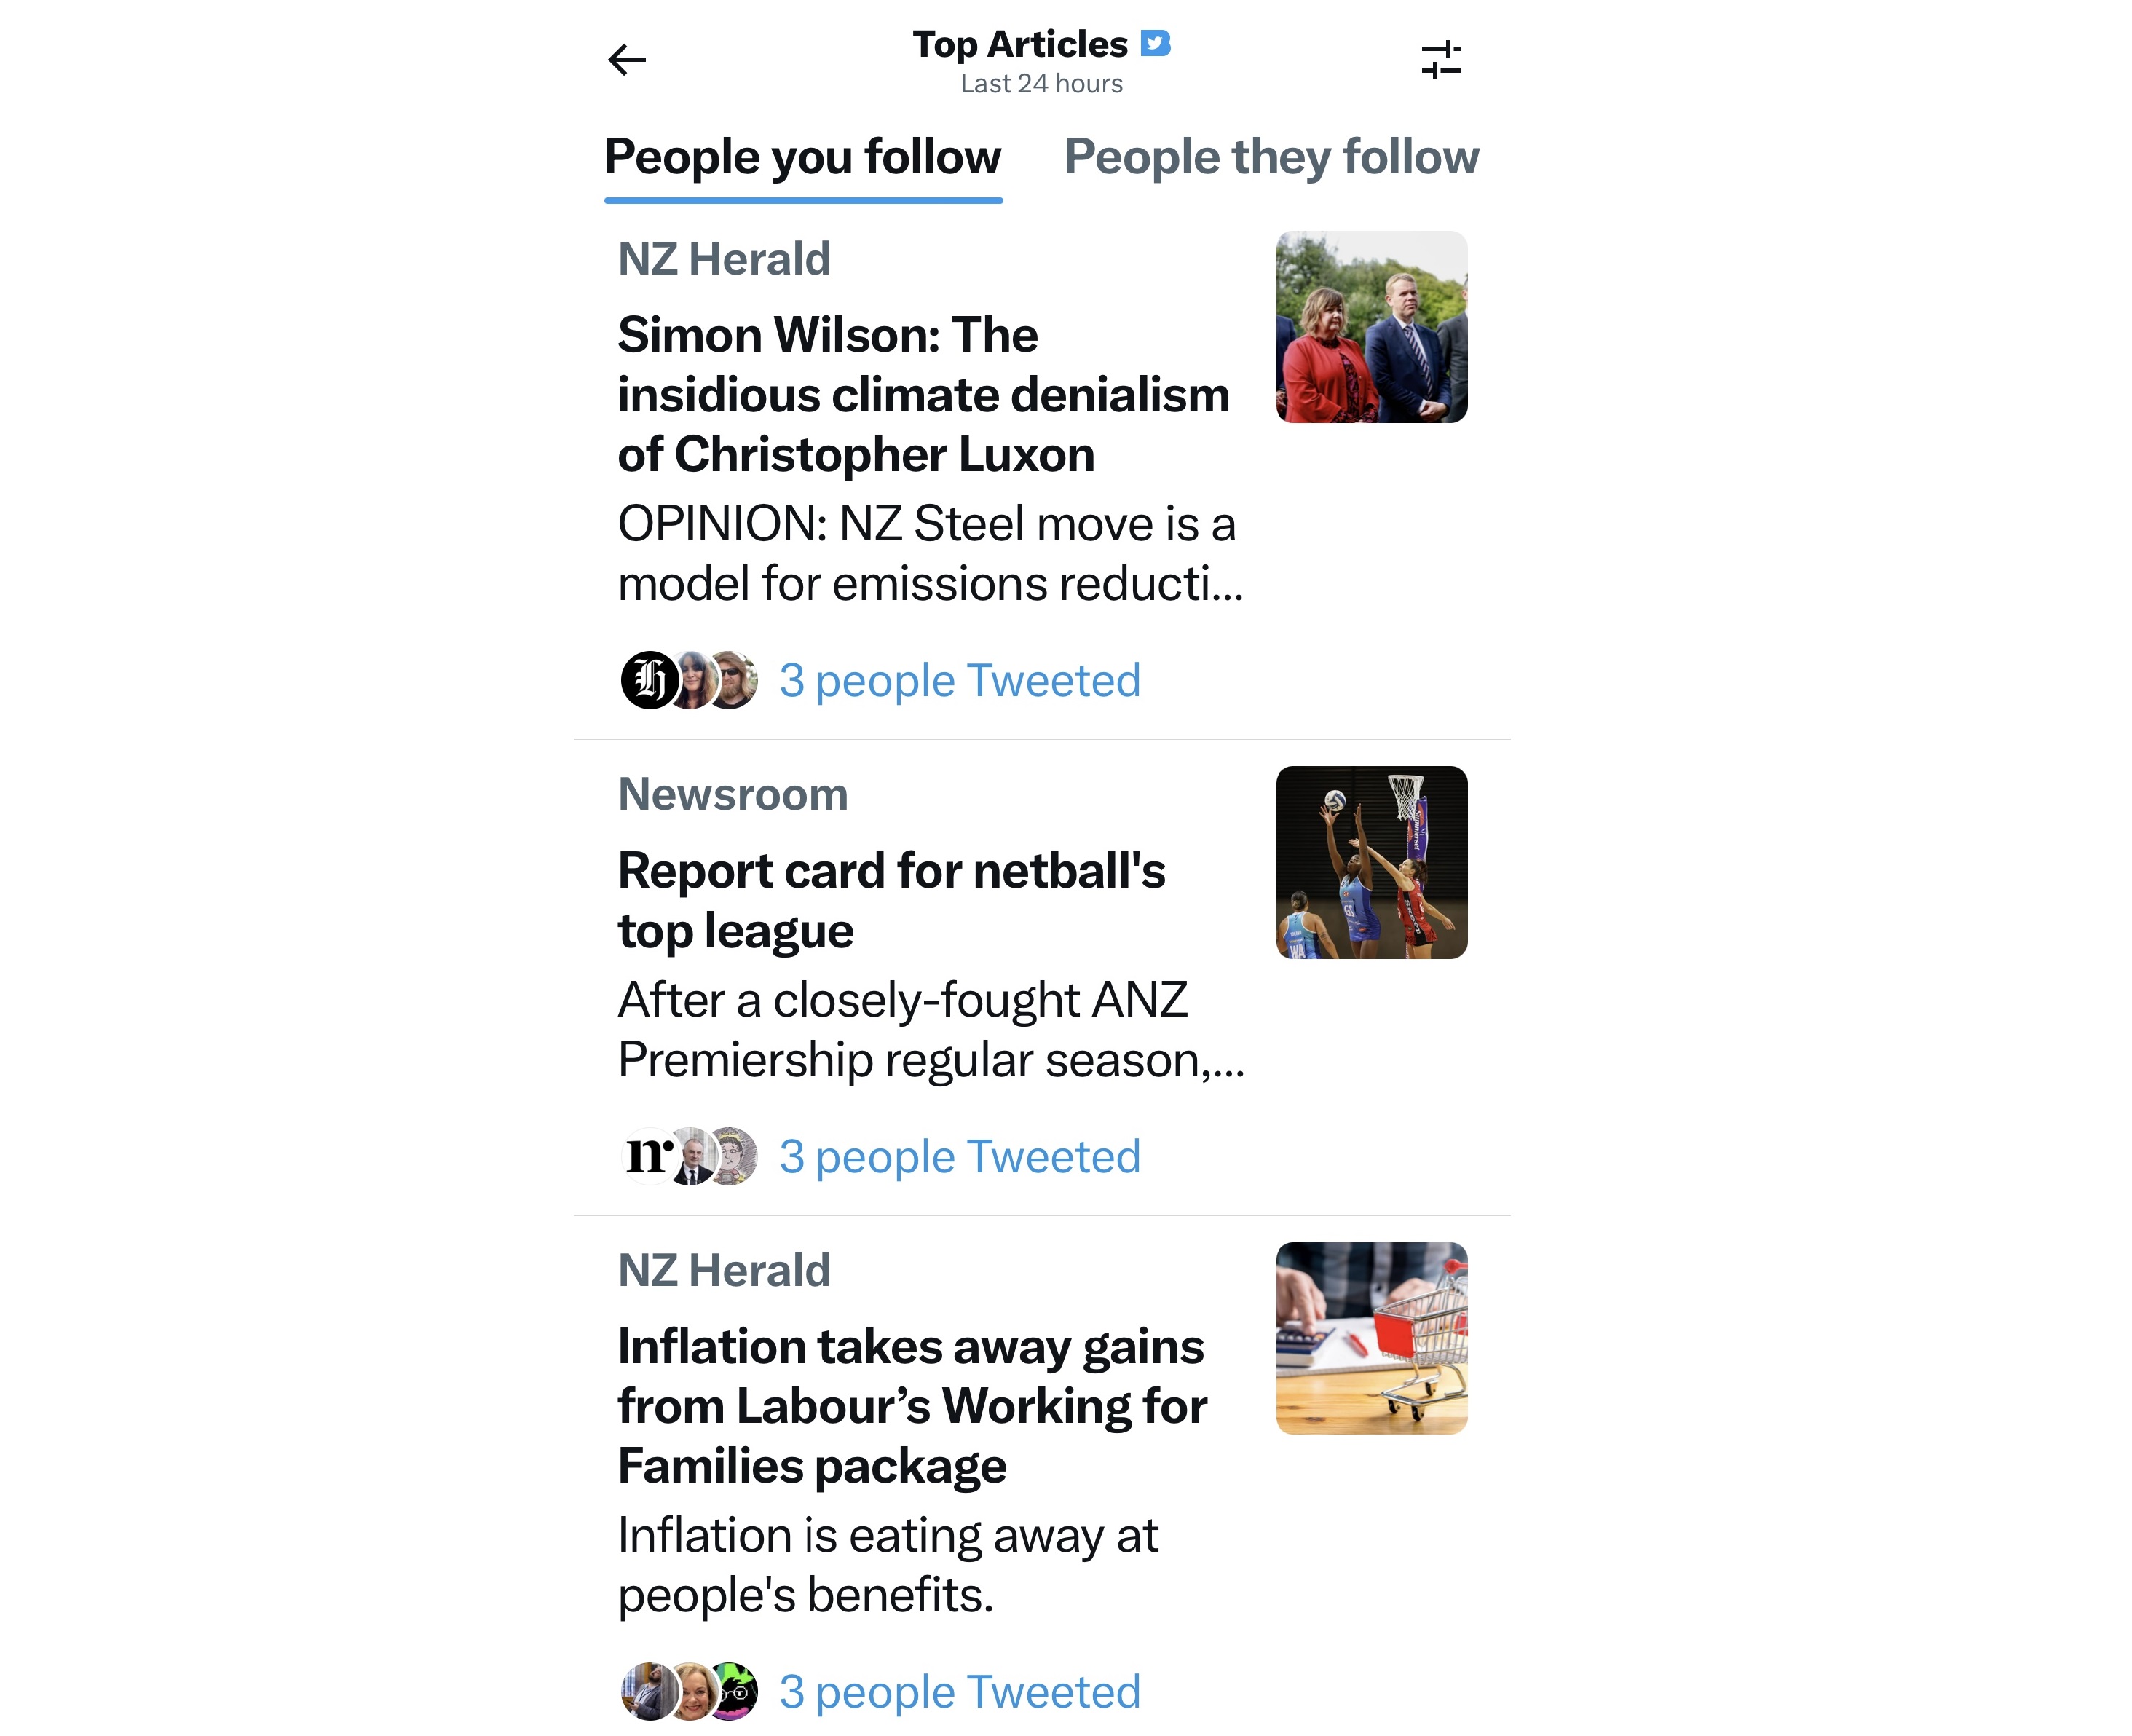 Elon Musk paying for LeBron James' Twitter blue tick - Basketball Network -  Your daily dose of basketball